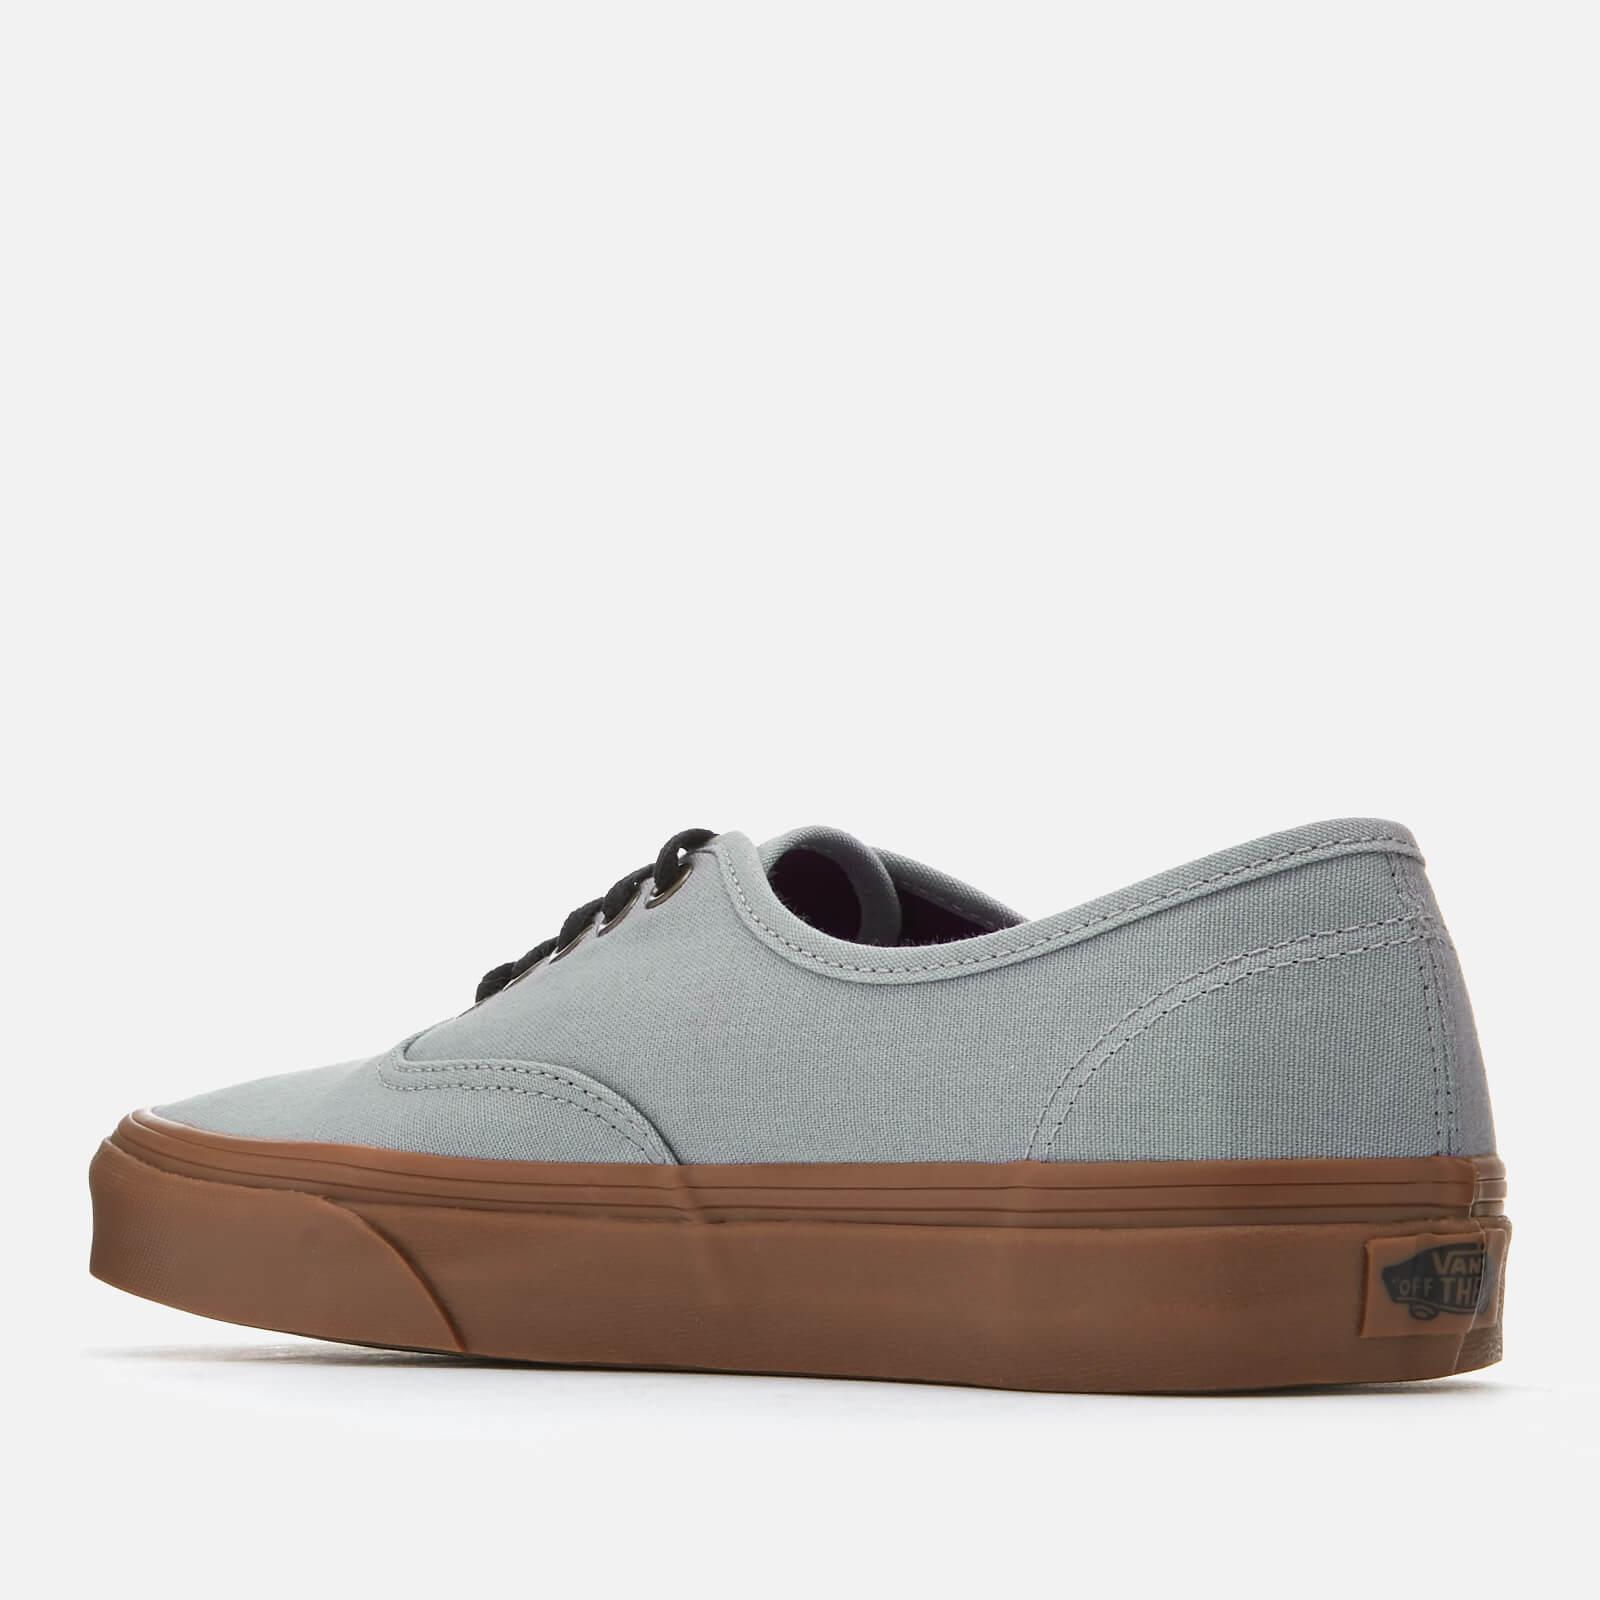 Vans Canvas Authentic Gum Sole Trainers in Grey (Gray) for Men - Lyst